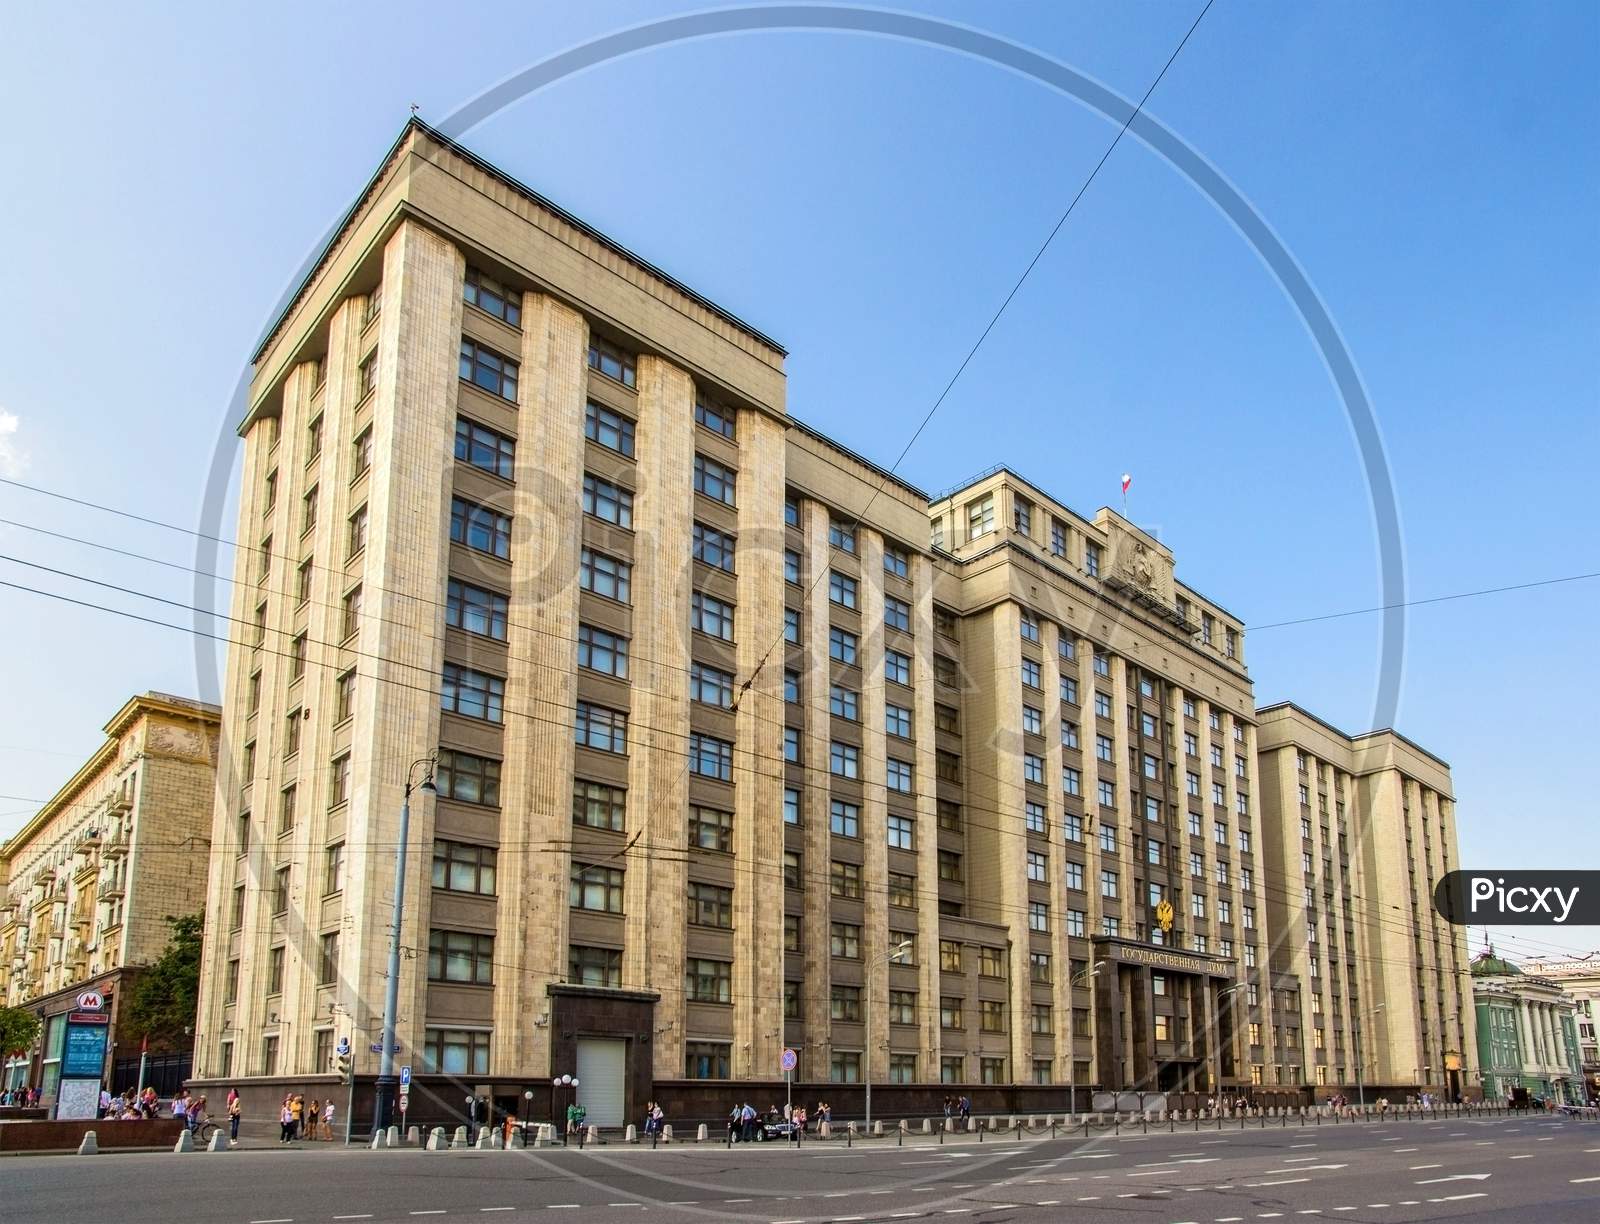 State Duma Of The Russian Federation In Moscow